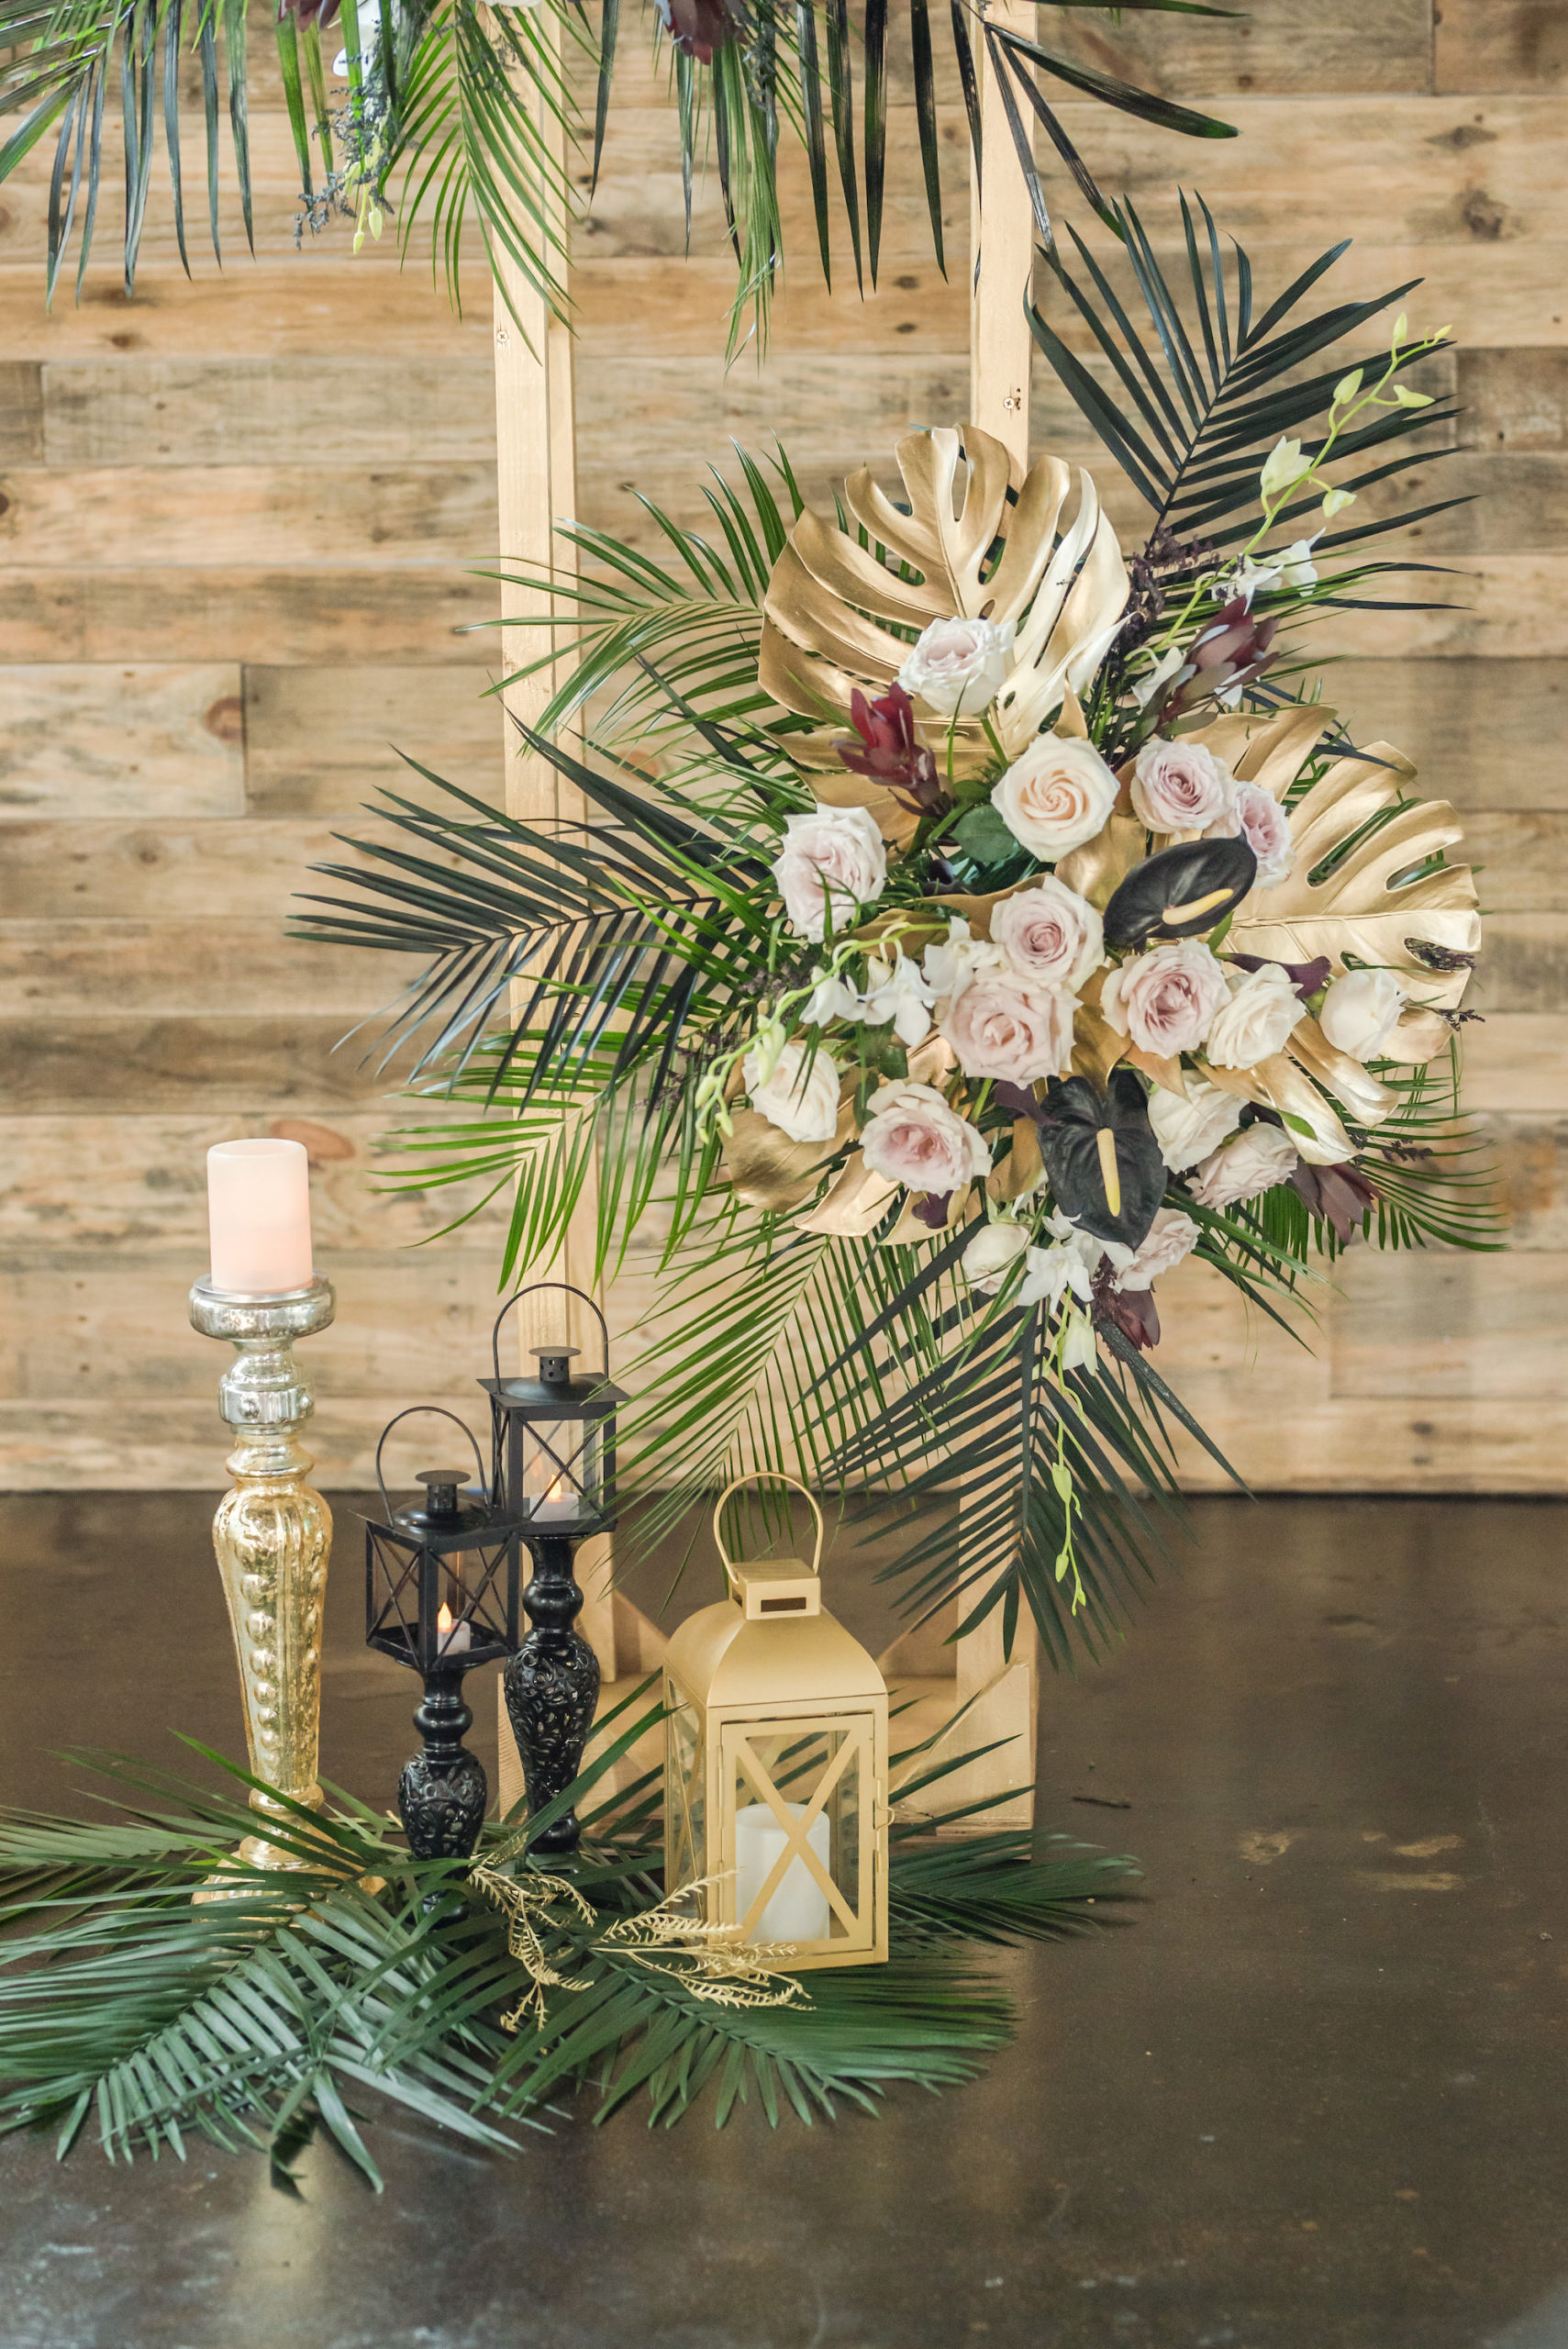 Dark Luxe, Romantic Wedding Styled Shoot, Tall Gold Geometric Stand with White and Blush Pink Roses, Palm Fronds and Gold Monstera Leaves, Gold Lantern, Black Candles | Tampa Bay Wedding Planner Elegant Affairs by Design | Madeira Beach Wedding Venue The West Events Sapce